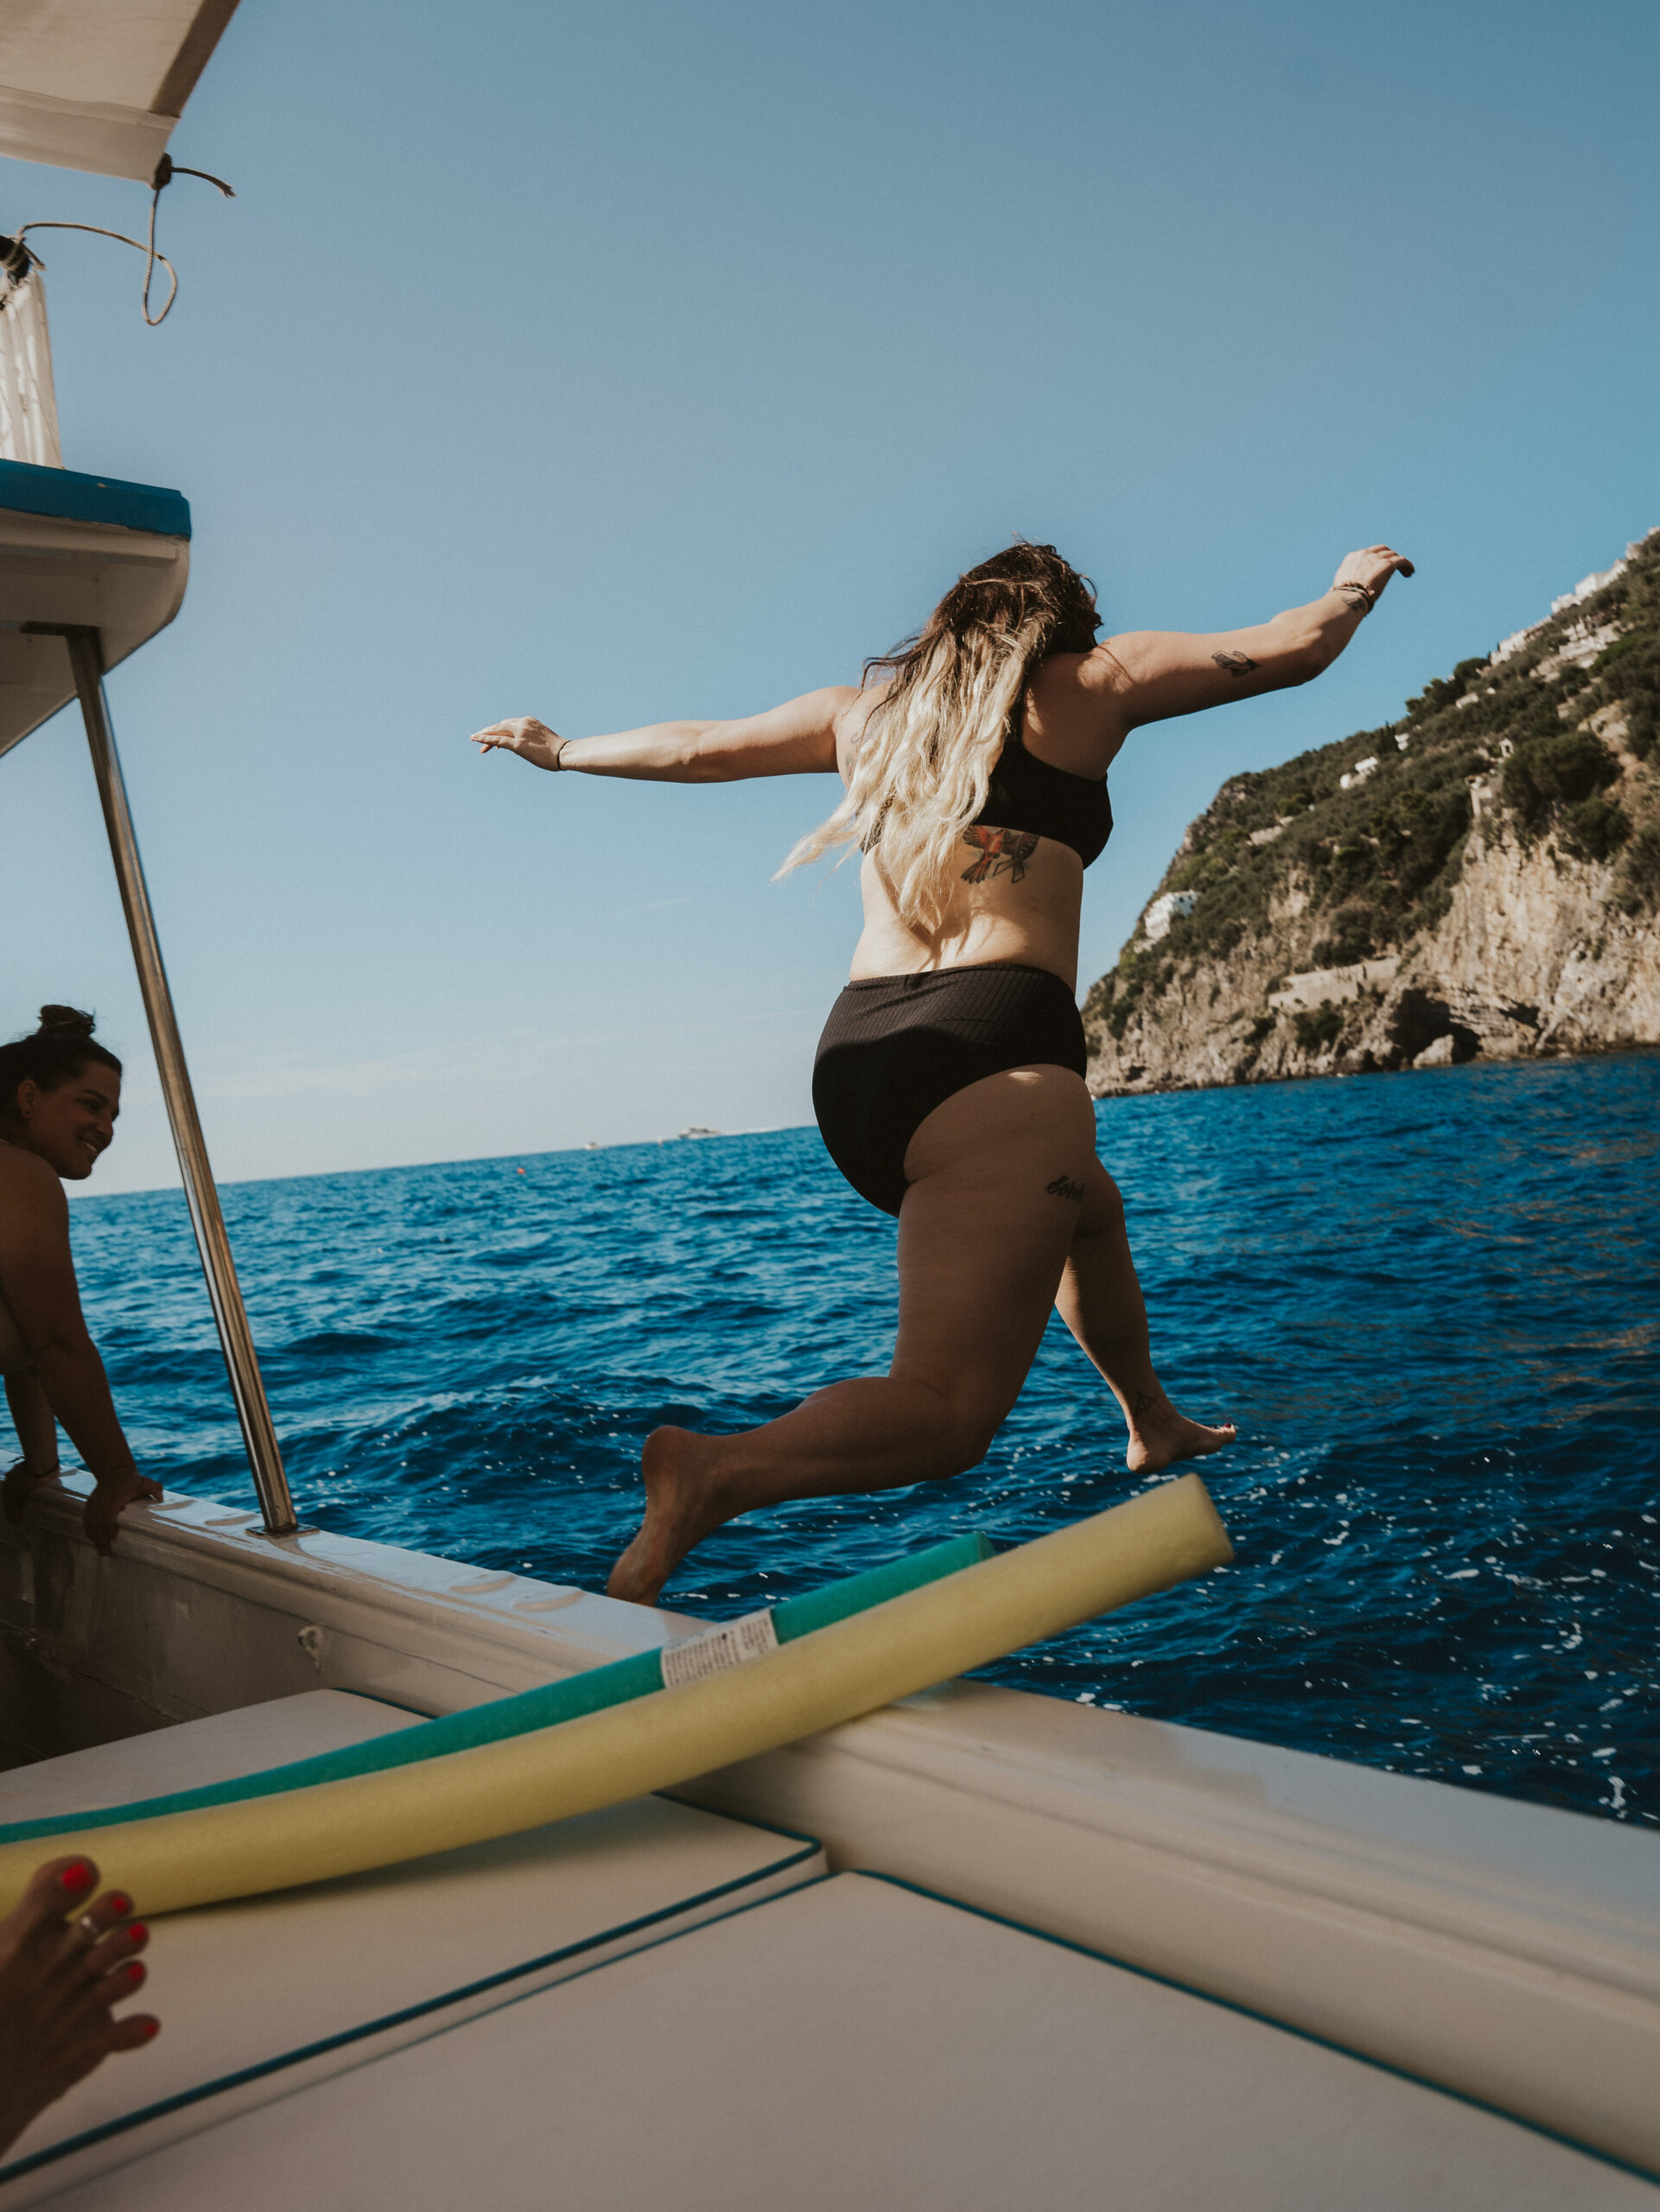 Jumping from private boat in Positano, Italy for boat tour. 